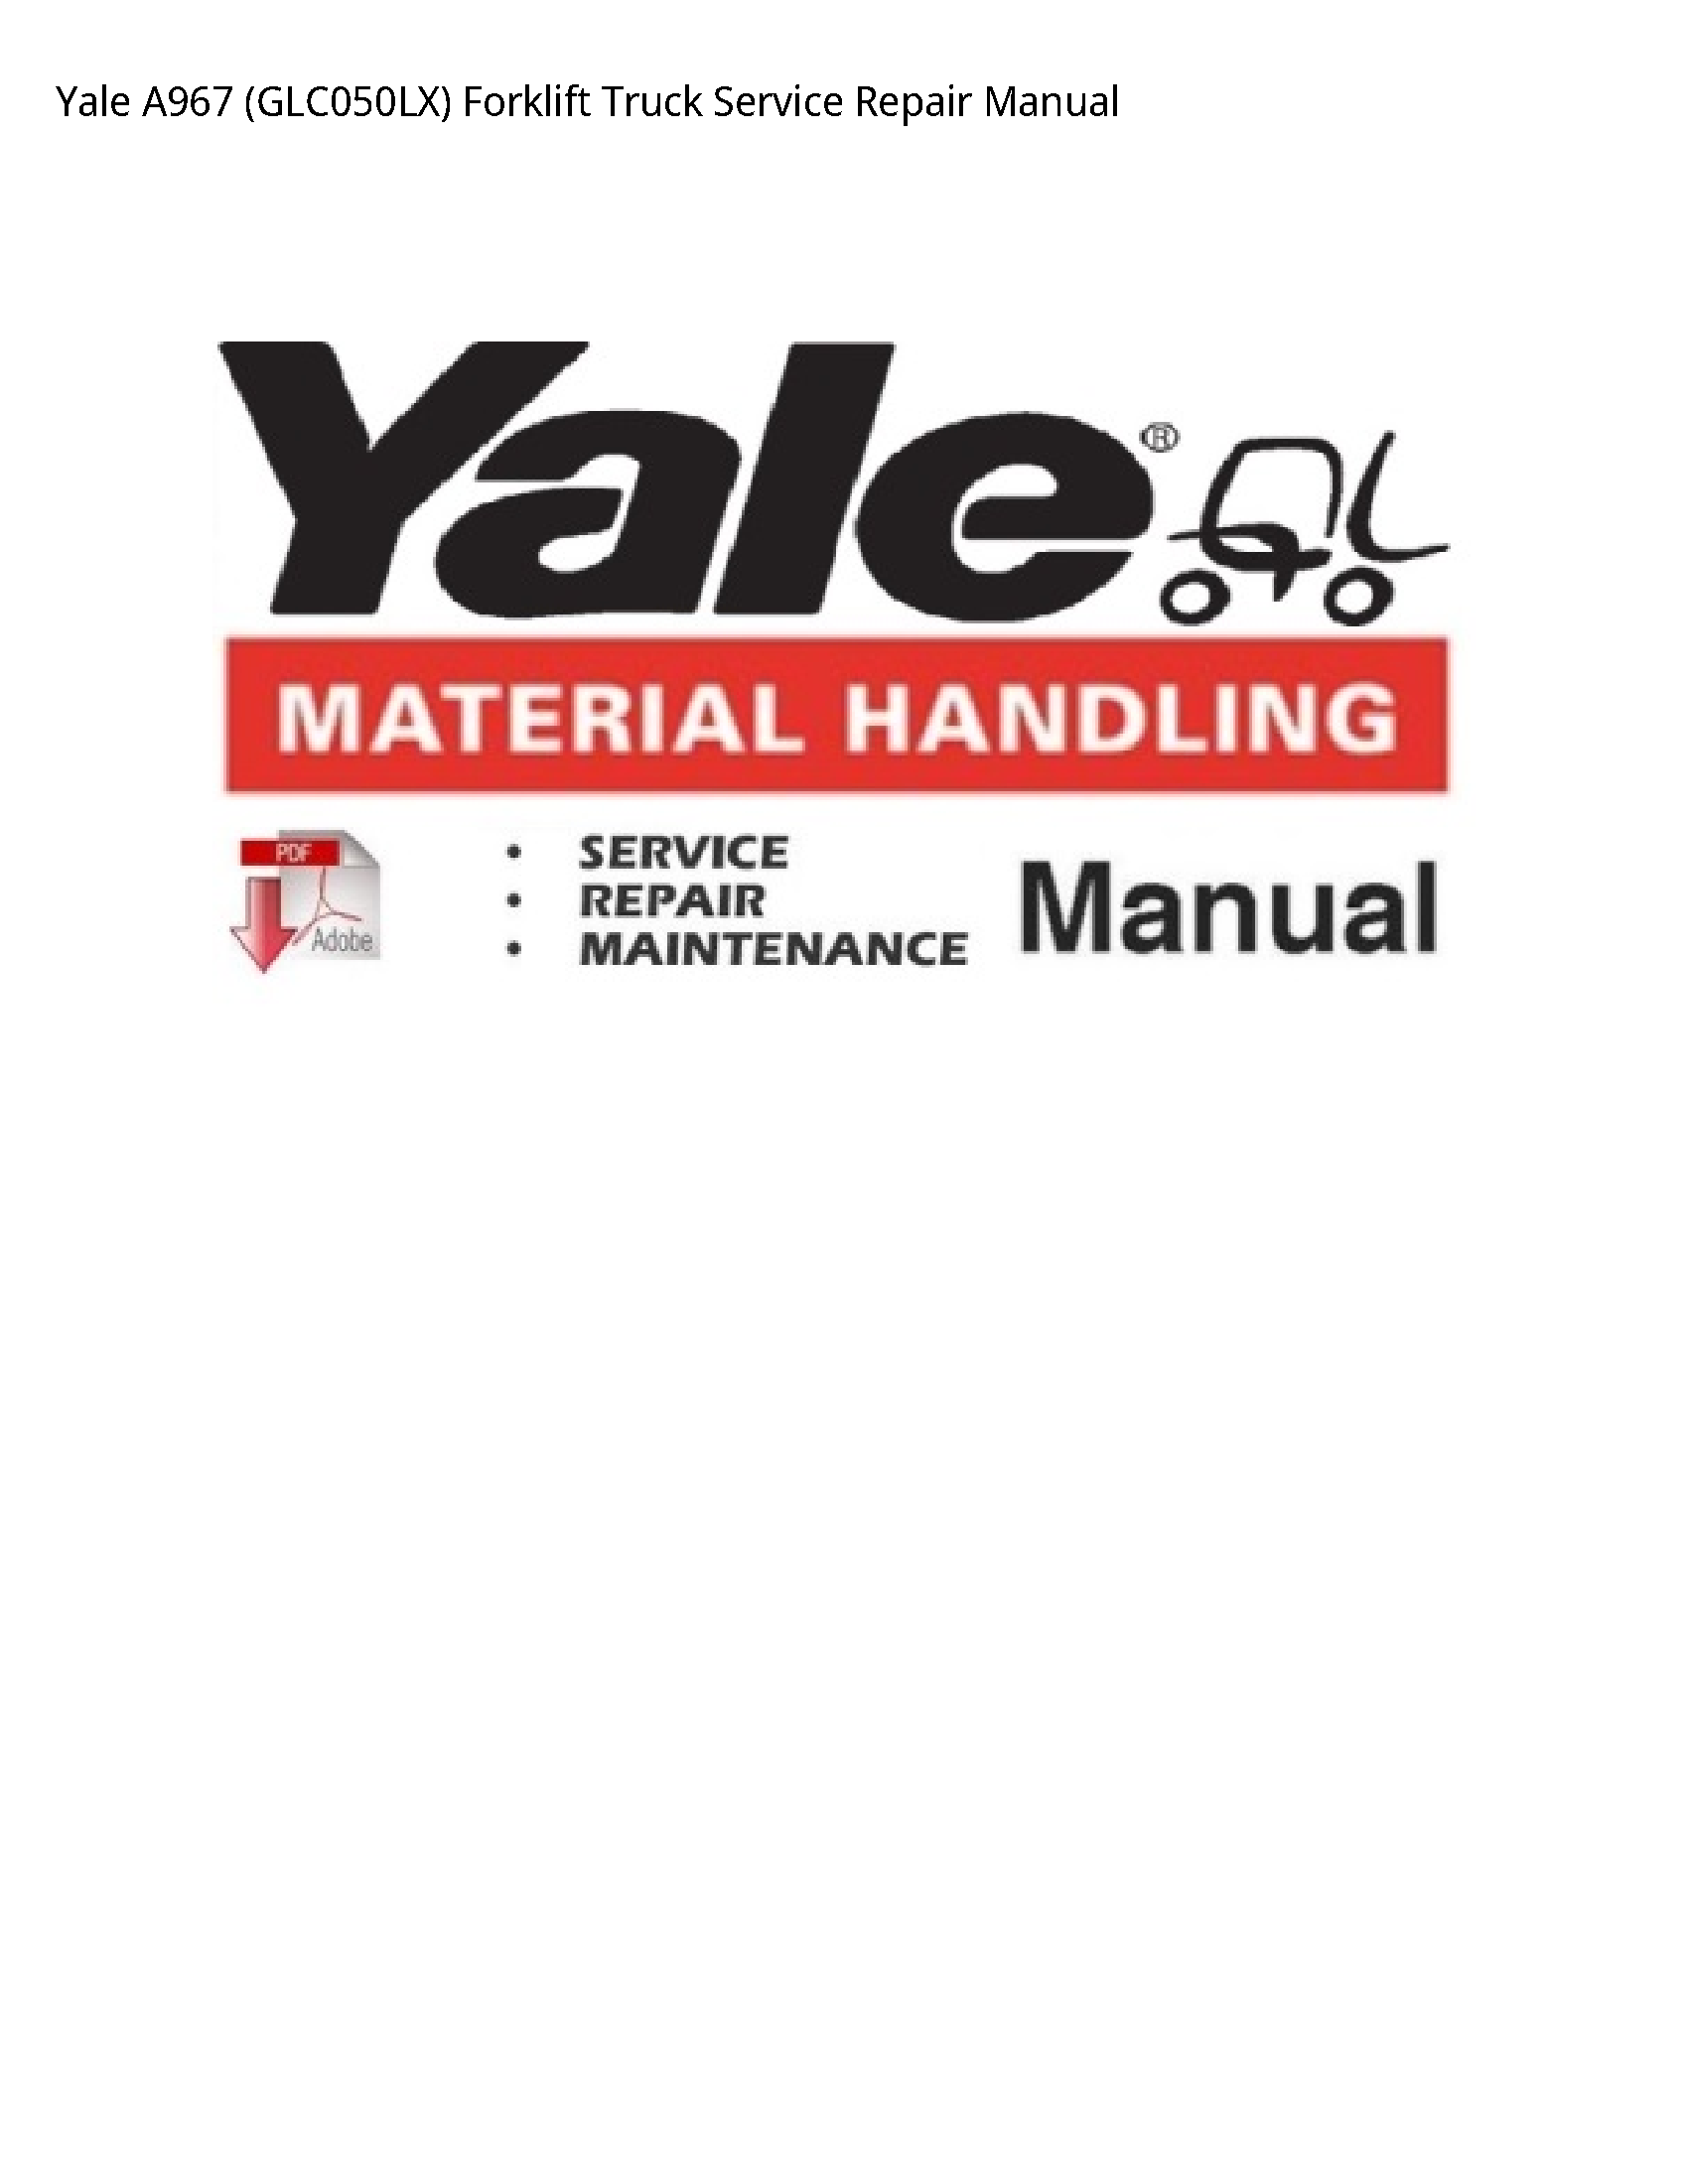 Yale A967 Forklift Truck manual